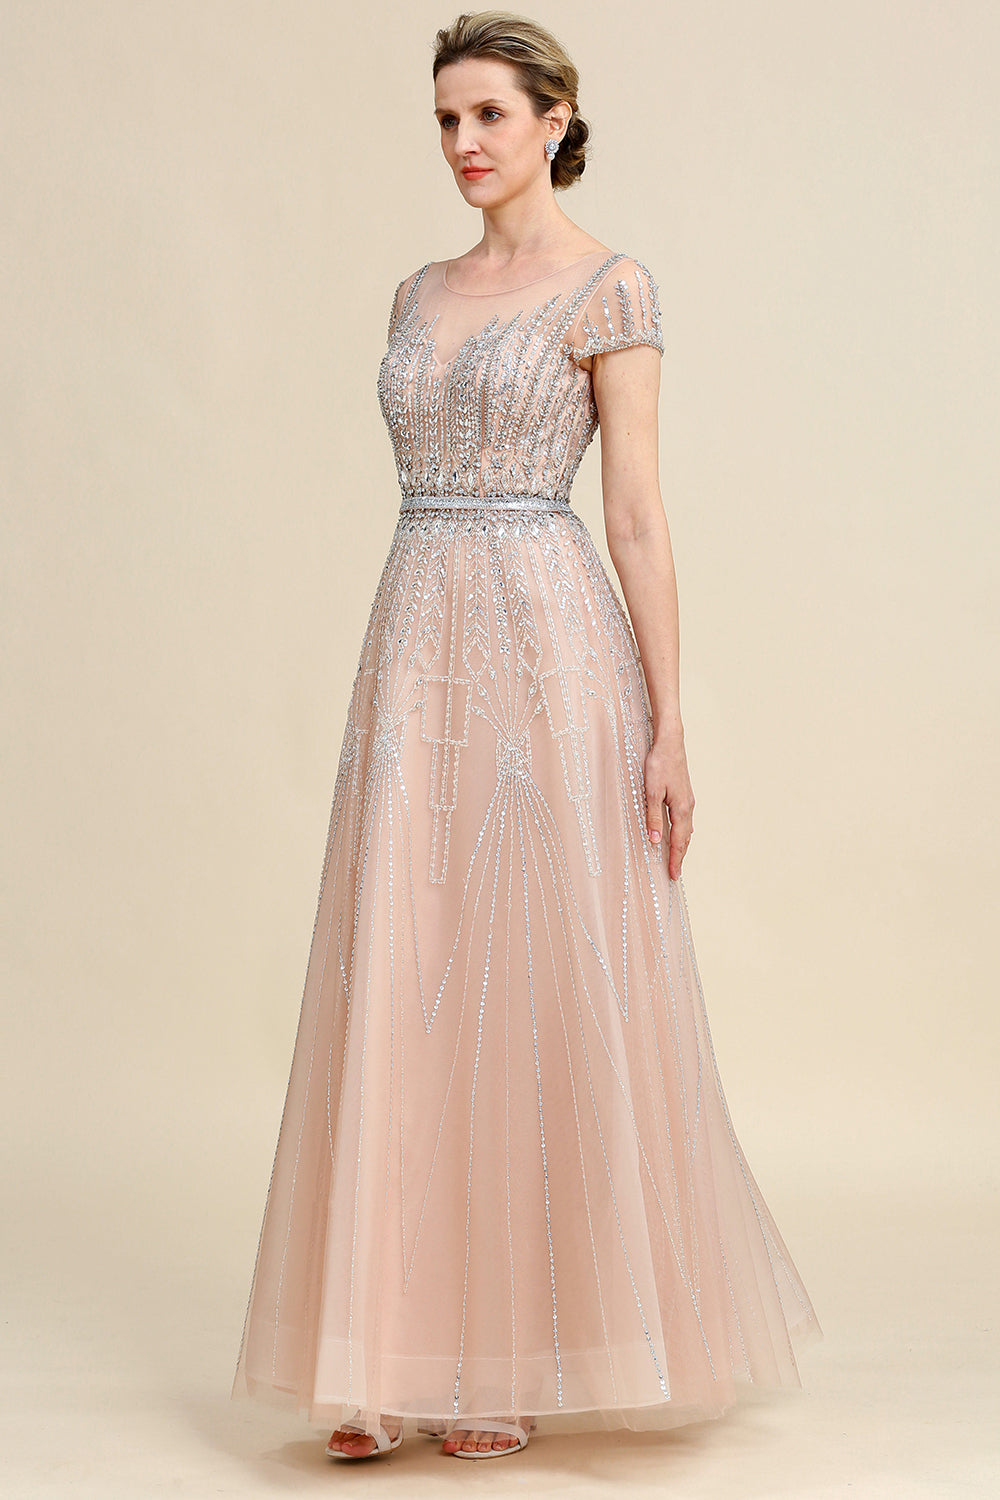 Blush A Line Beaded Mother of Bride Dress With Short Sleeves